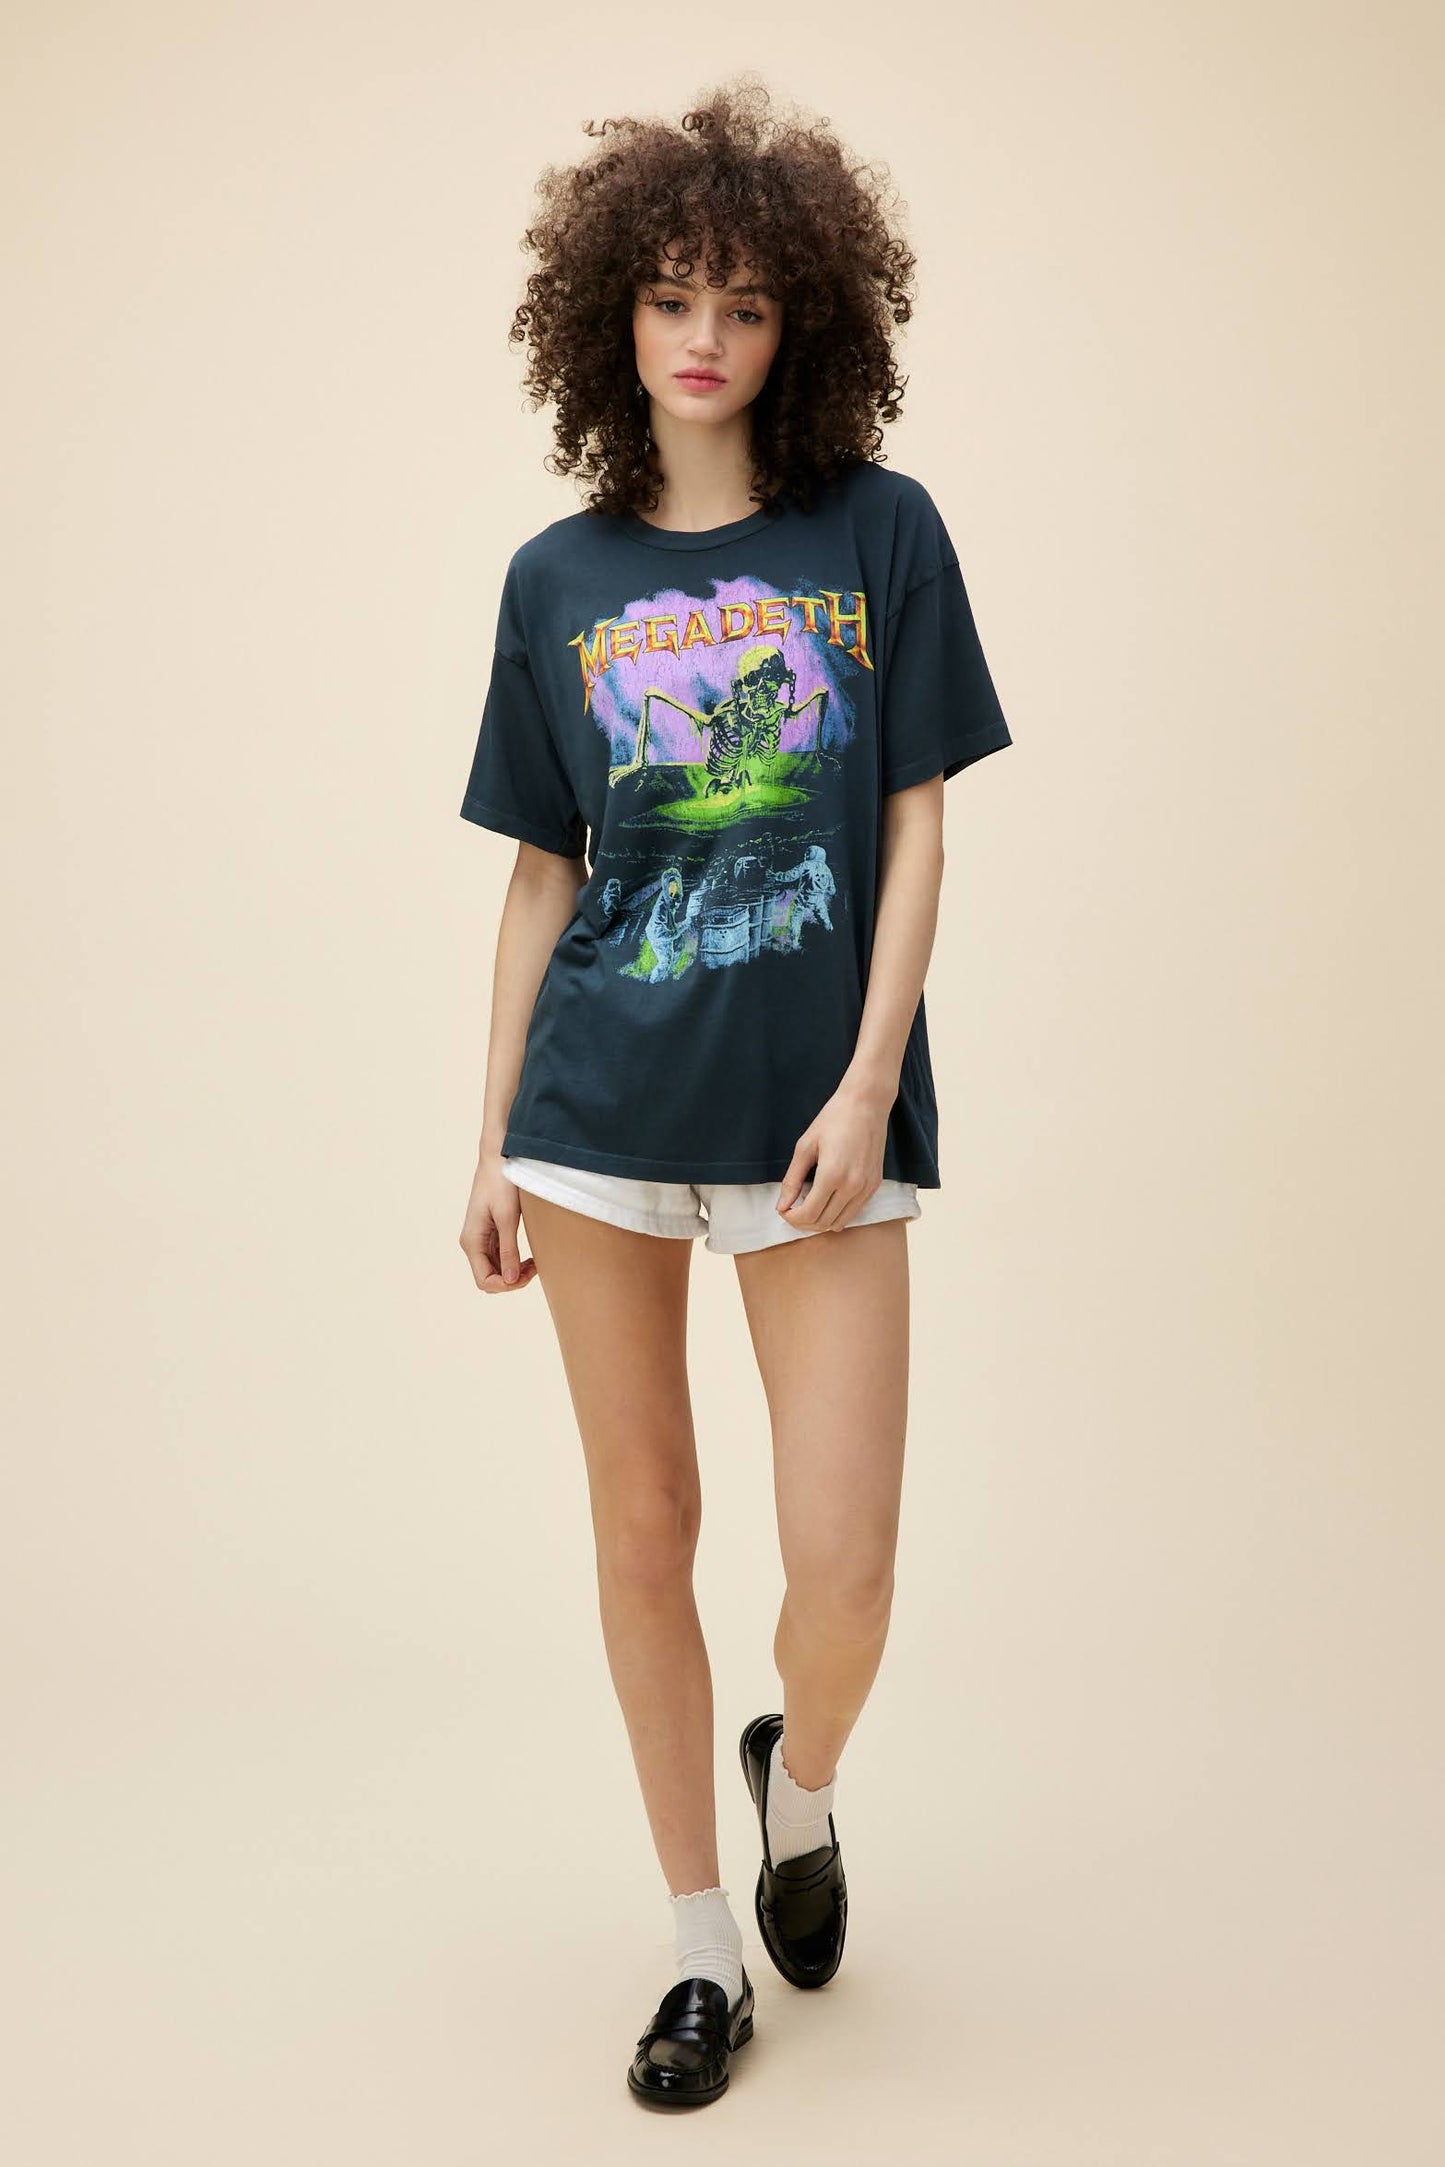 Curly-haired model wears a Megadeth 'Contaminated' graphic tee with front and back artwork.